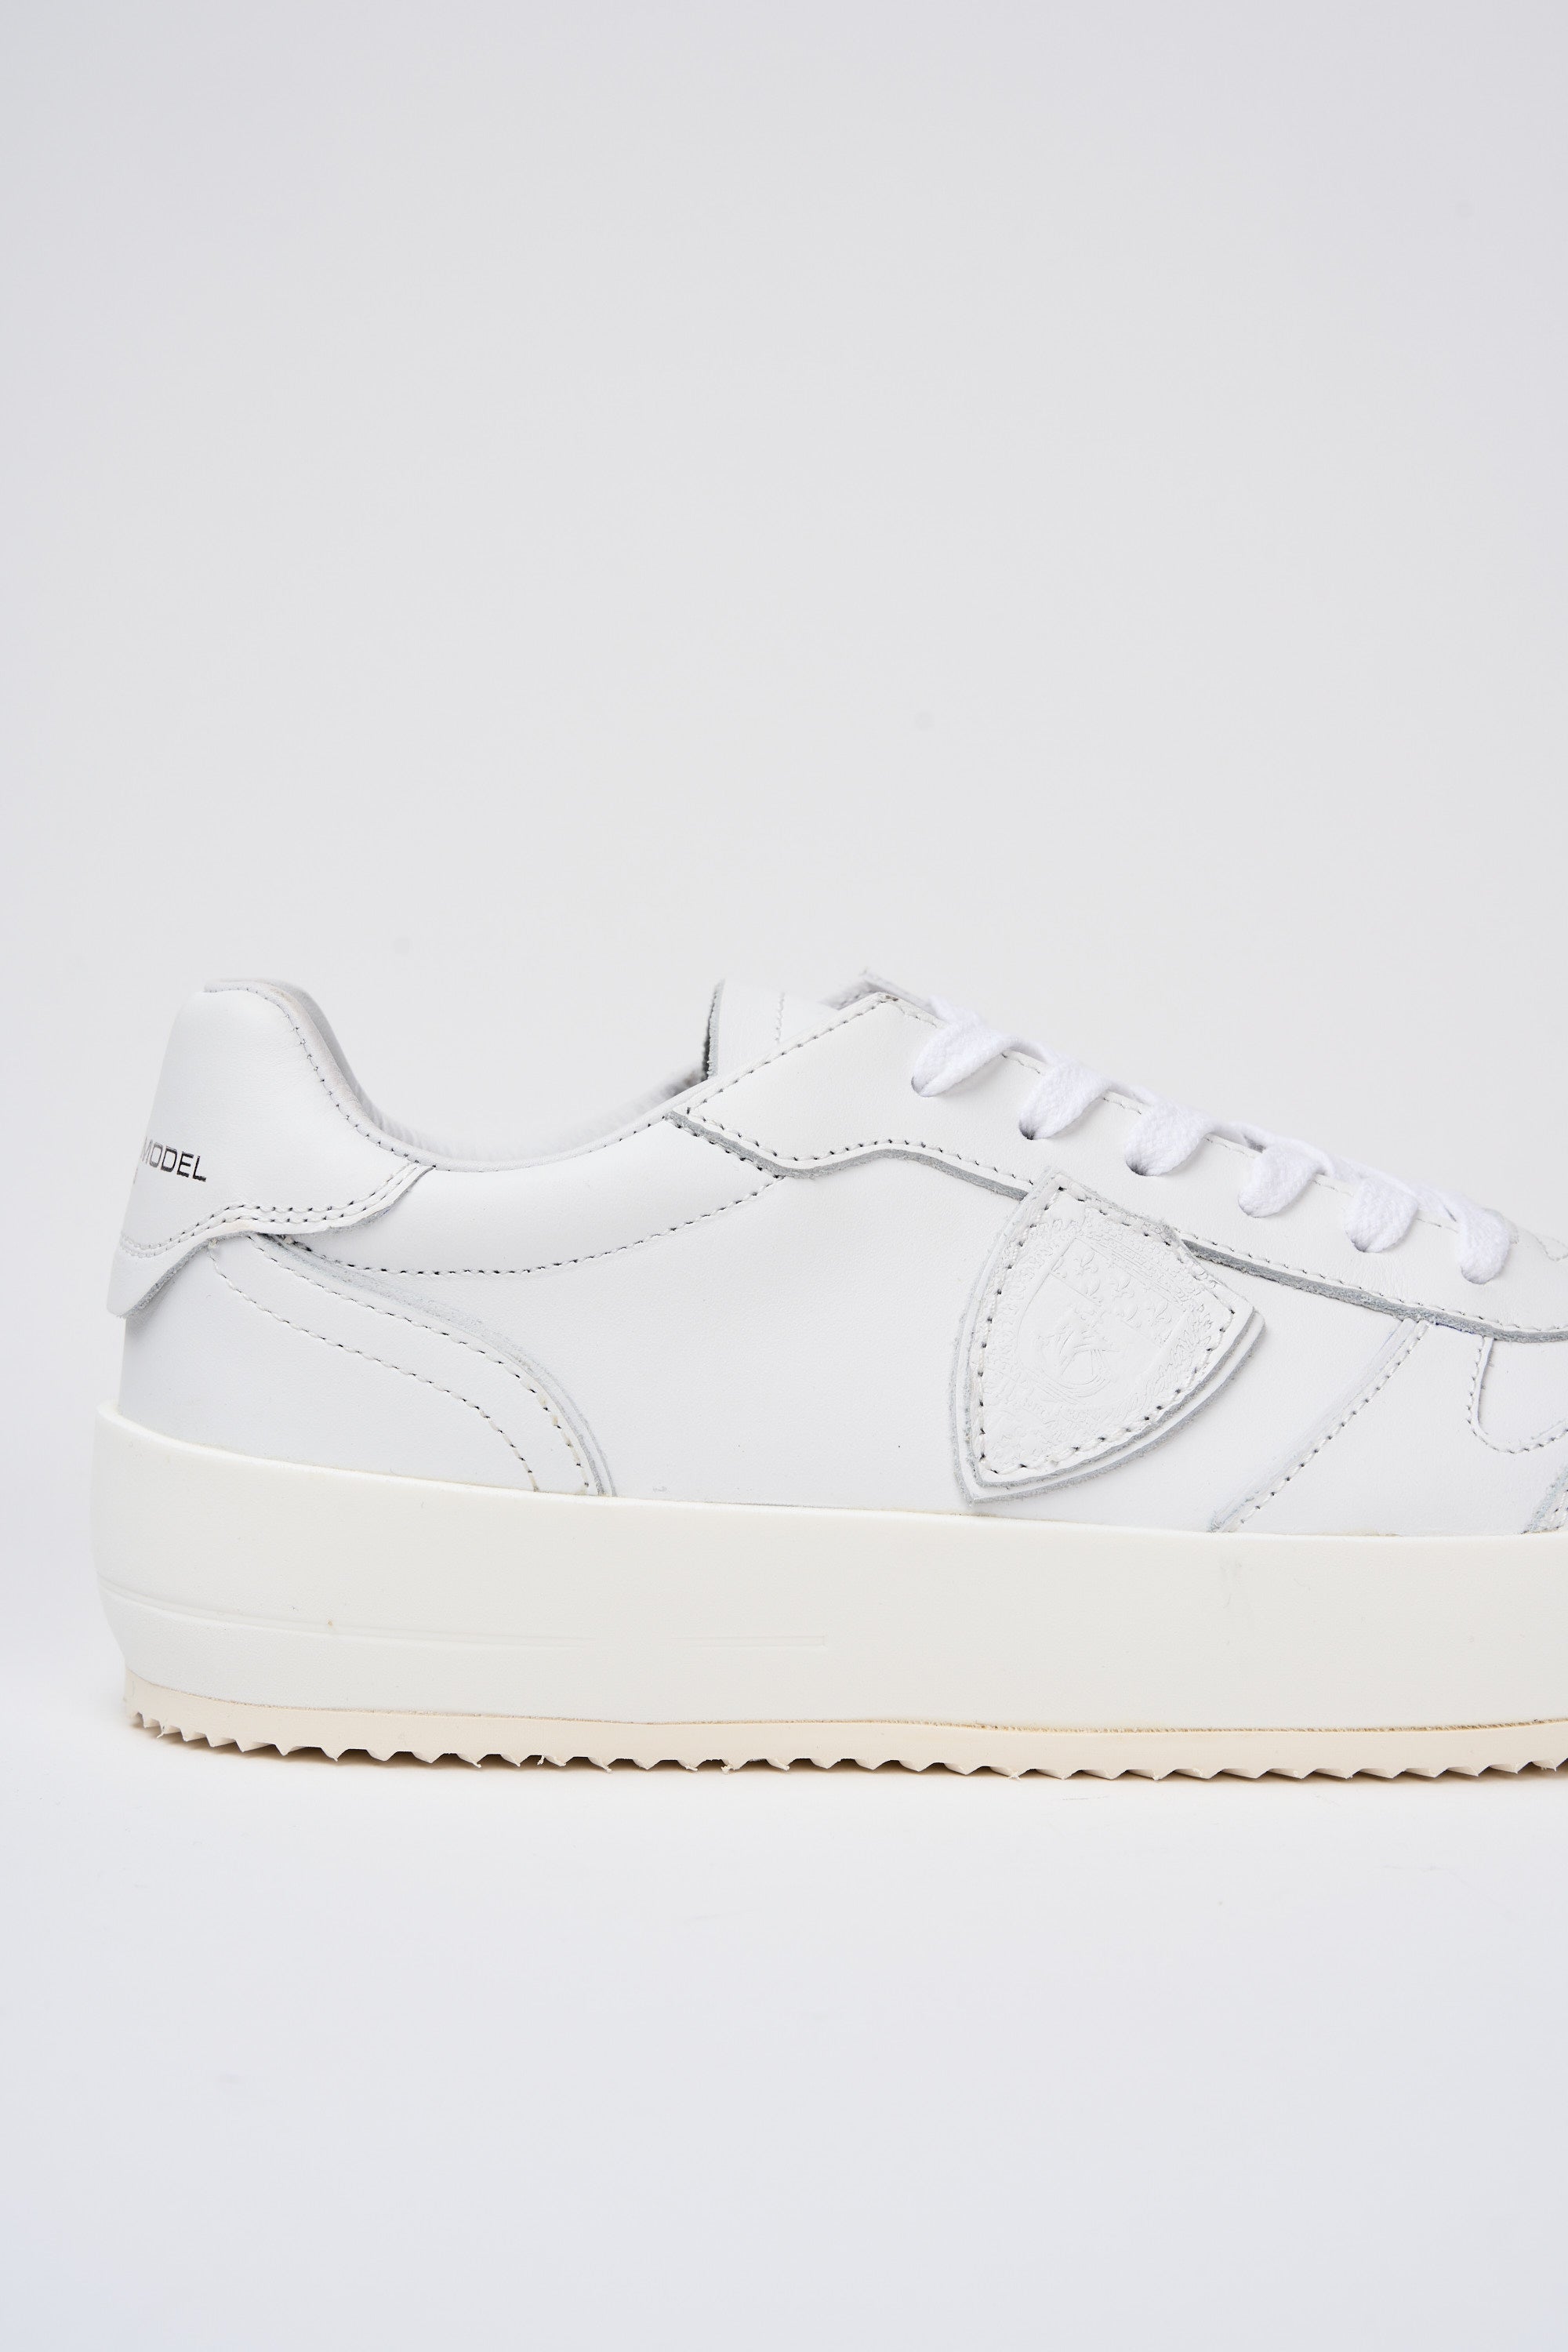 Philippe Model Sneaker Nice in Leather White-7